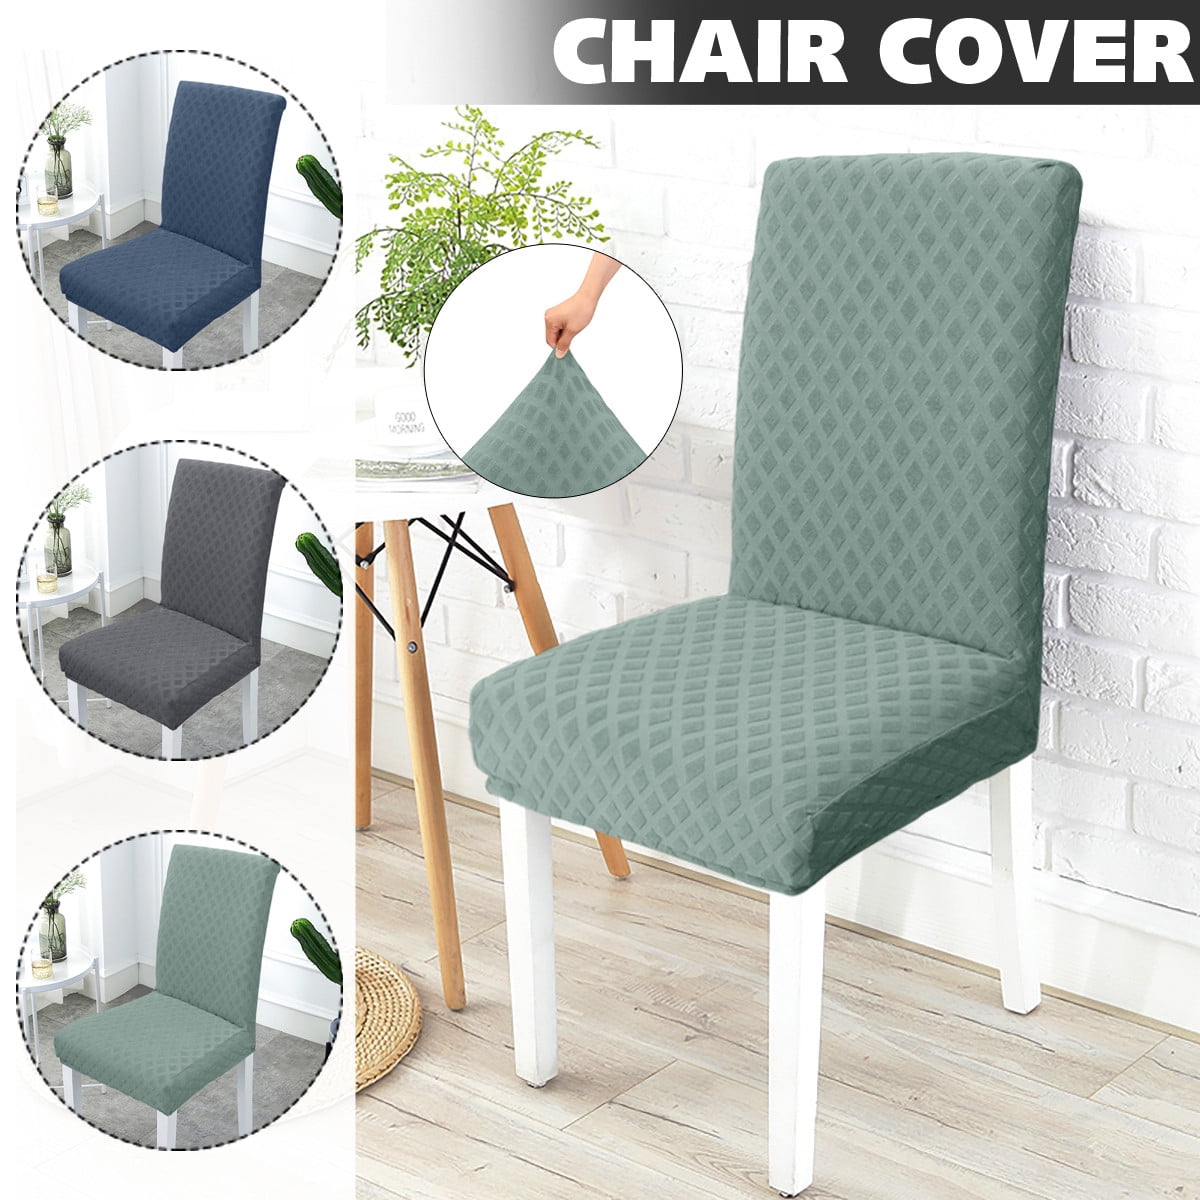 Details about   Removable Stretch Chair Covers Slipcovers Dining Room Seat Cover Decor Home 